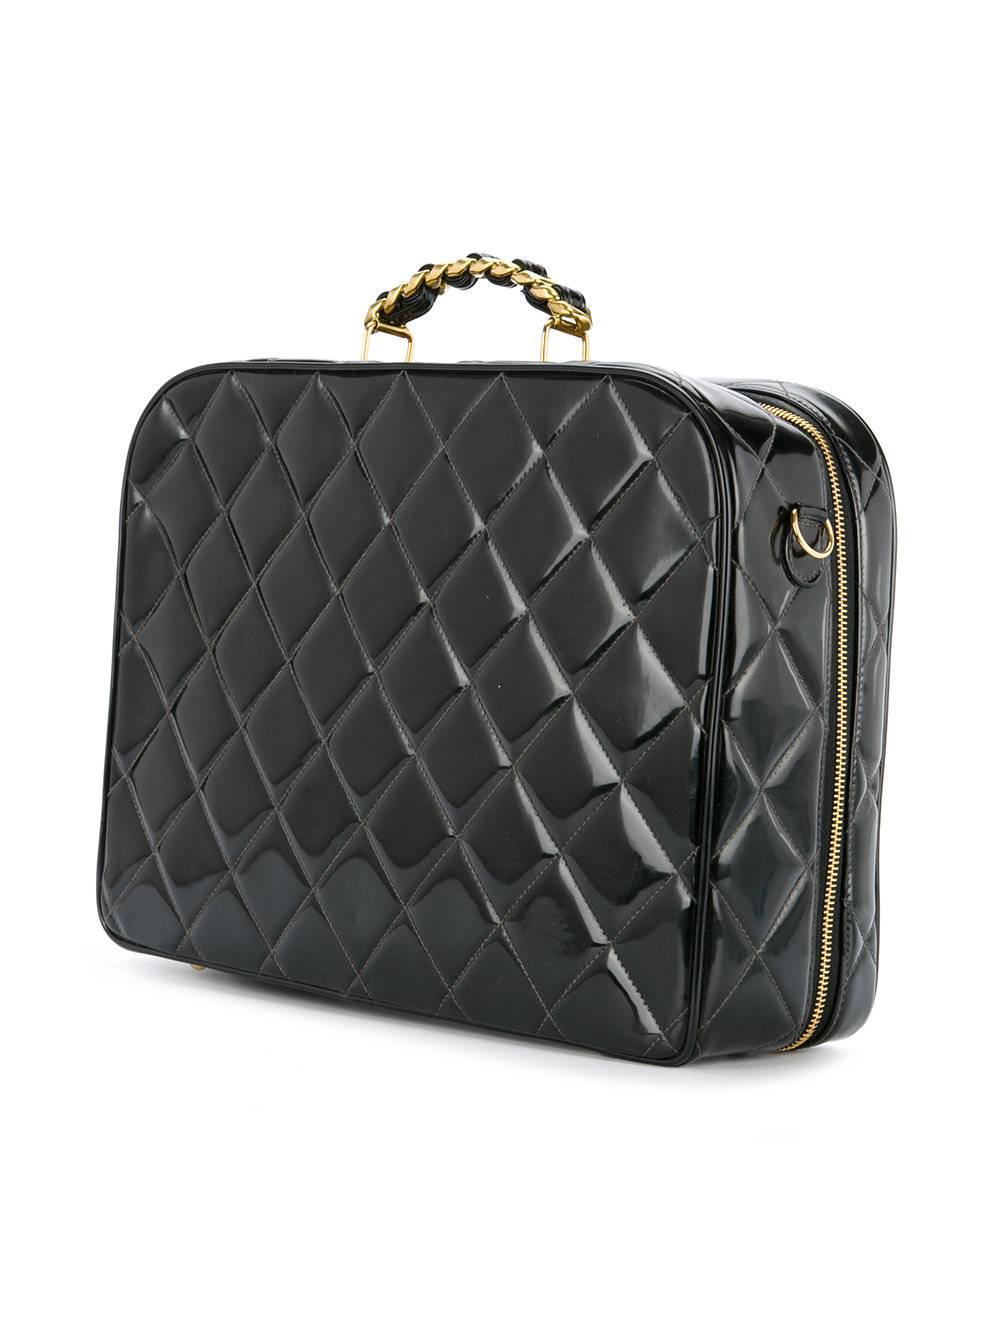 chanel lunch box style bag